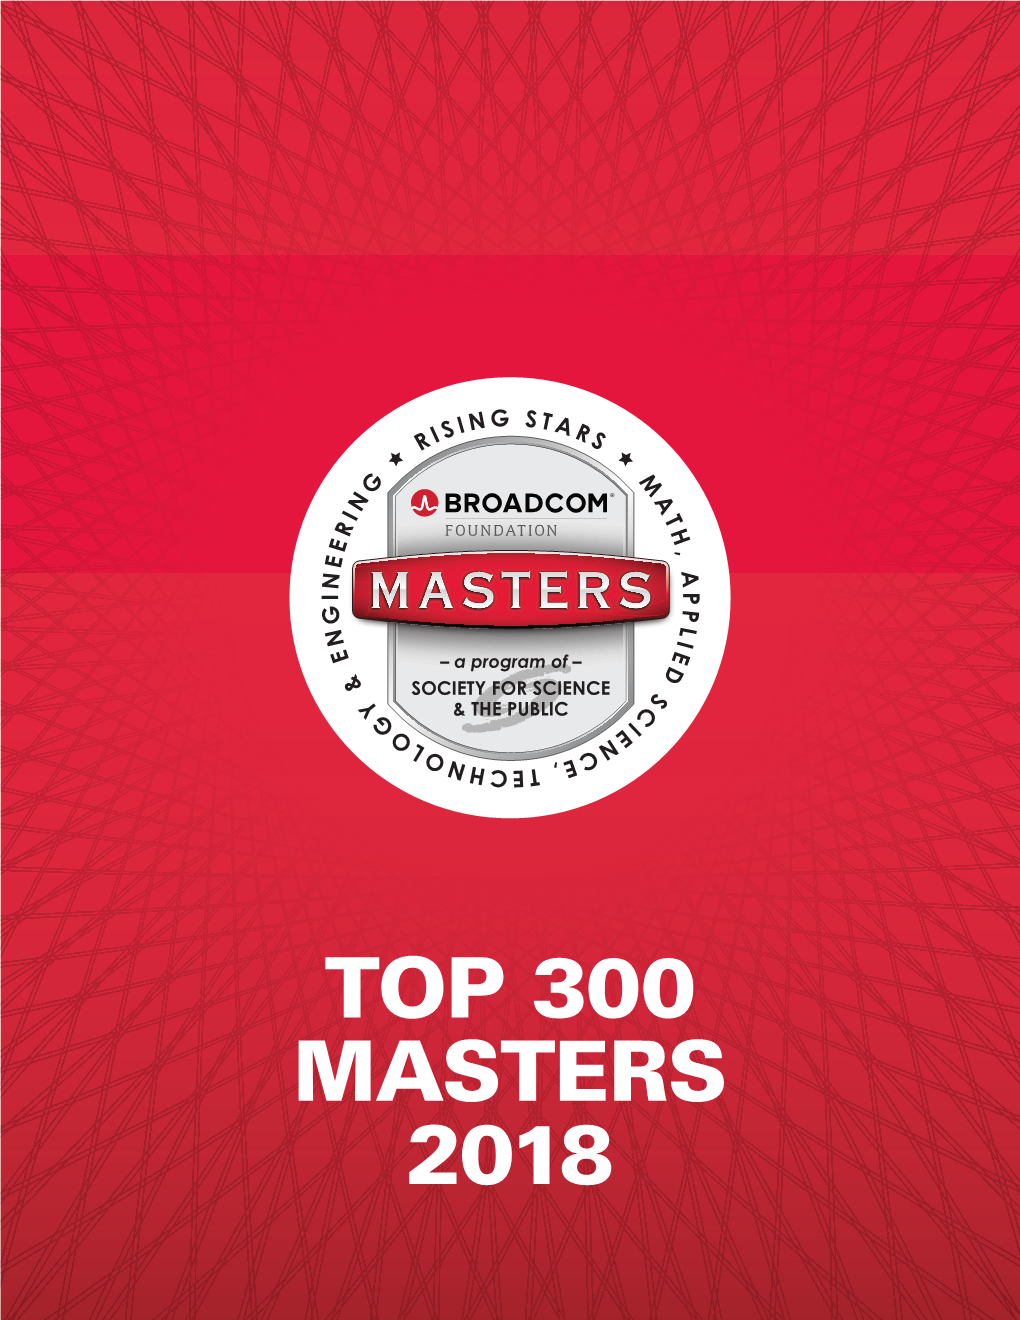 Top 300 Masters 2018